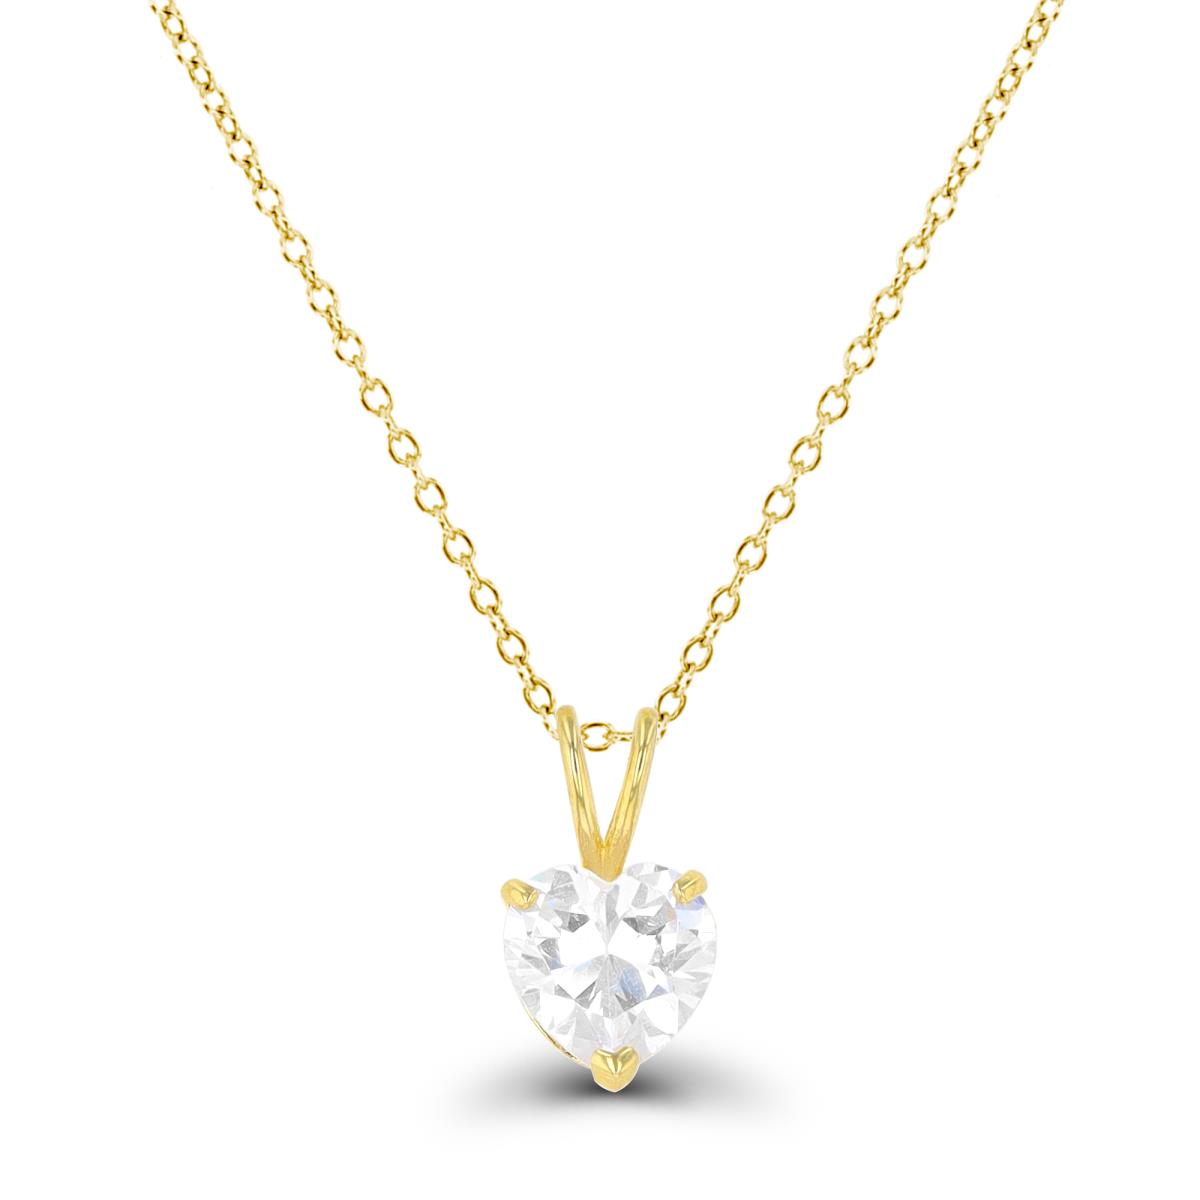 14K Yellow Gold 7mm Heart Solitaire 18" Necklace